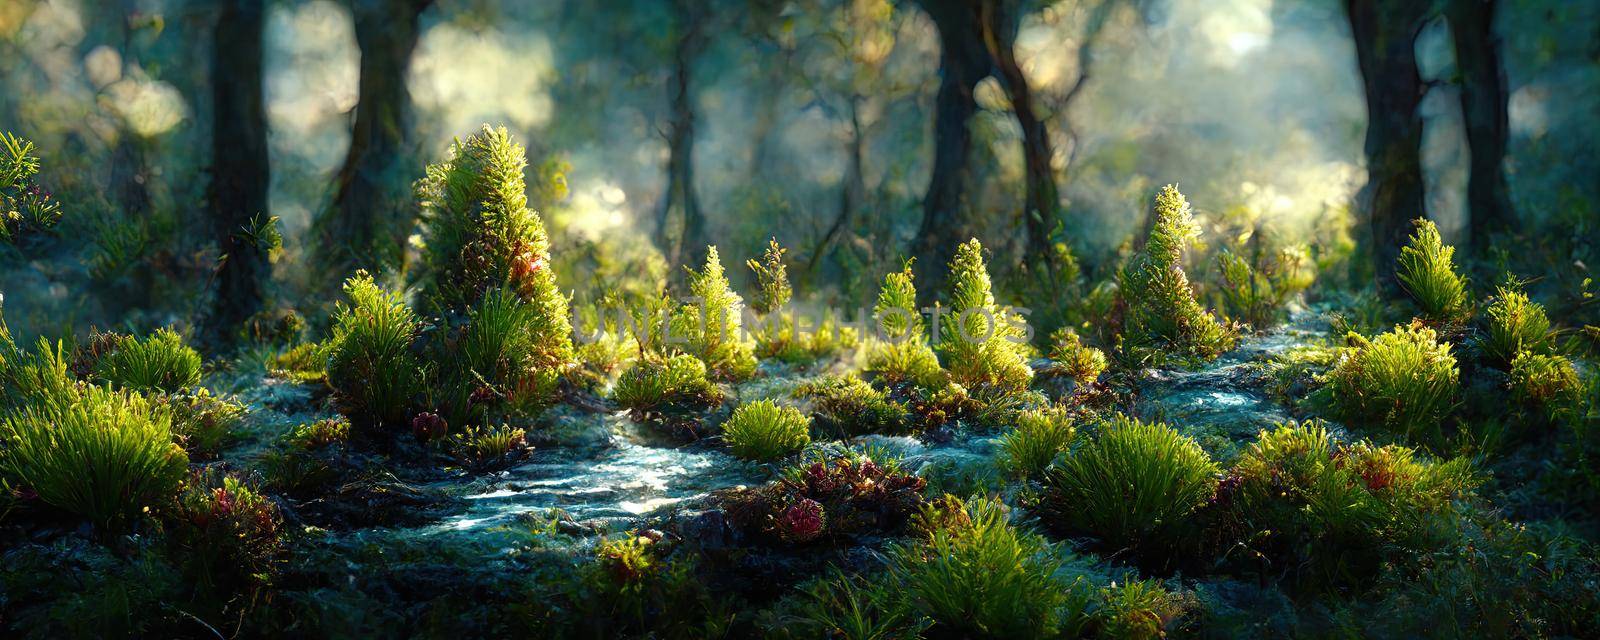 Magic fairytale forest with lake in fantasy style by TRMK